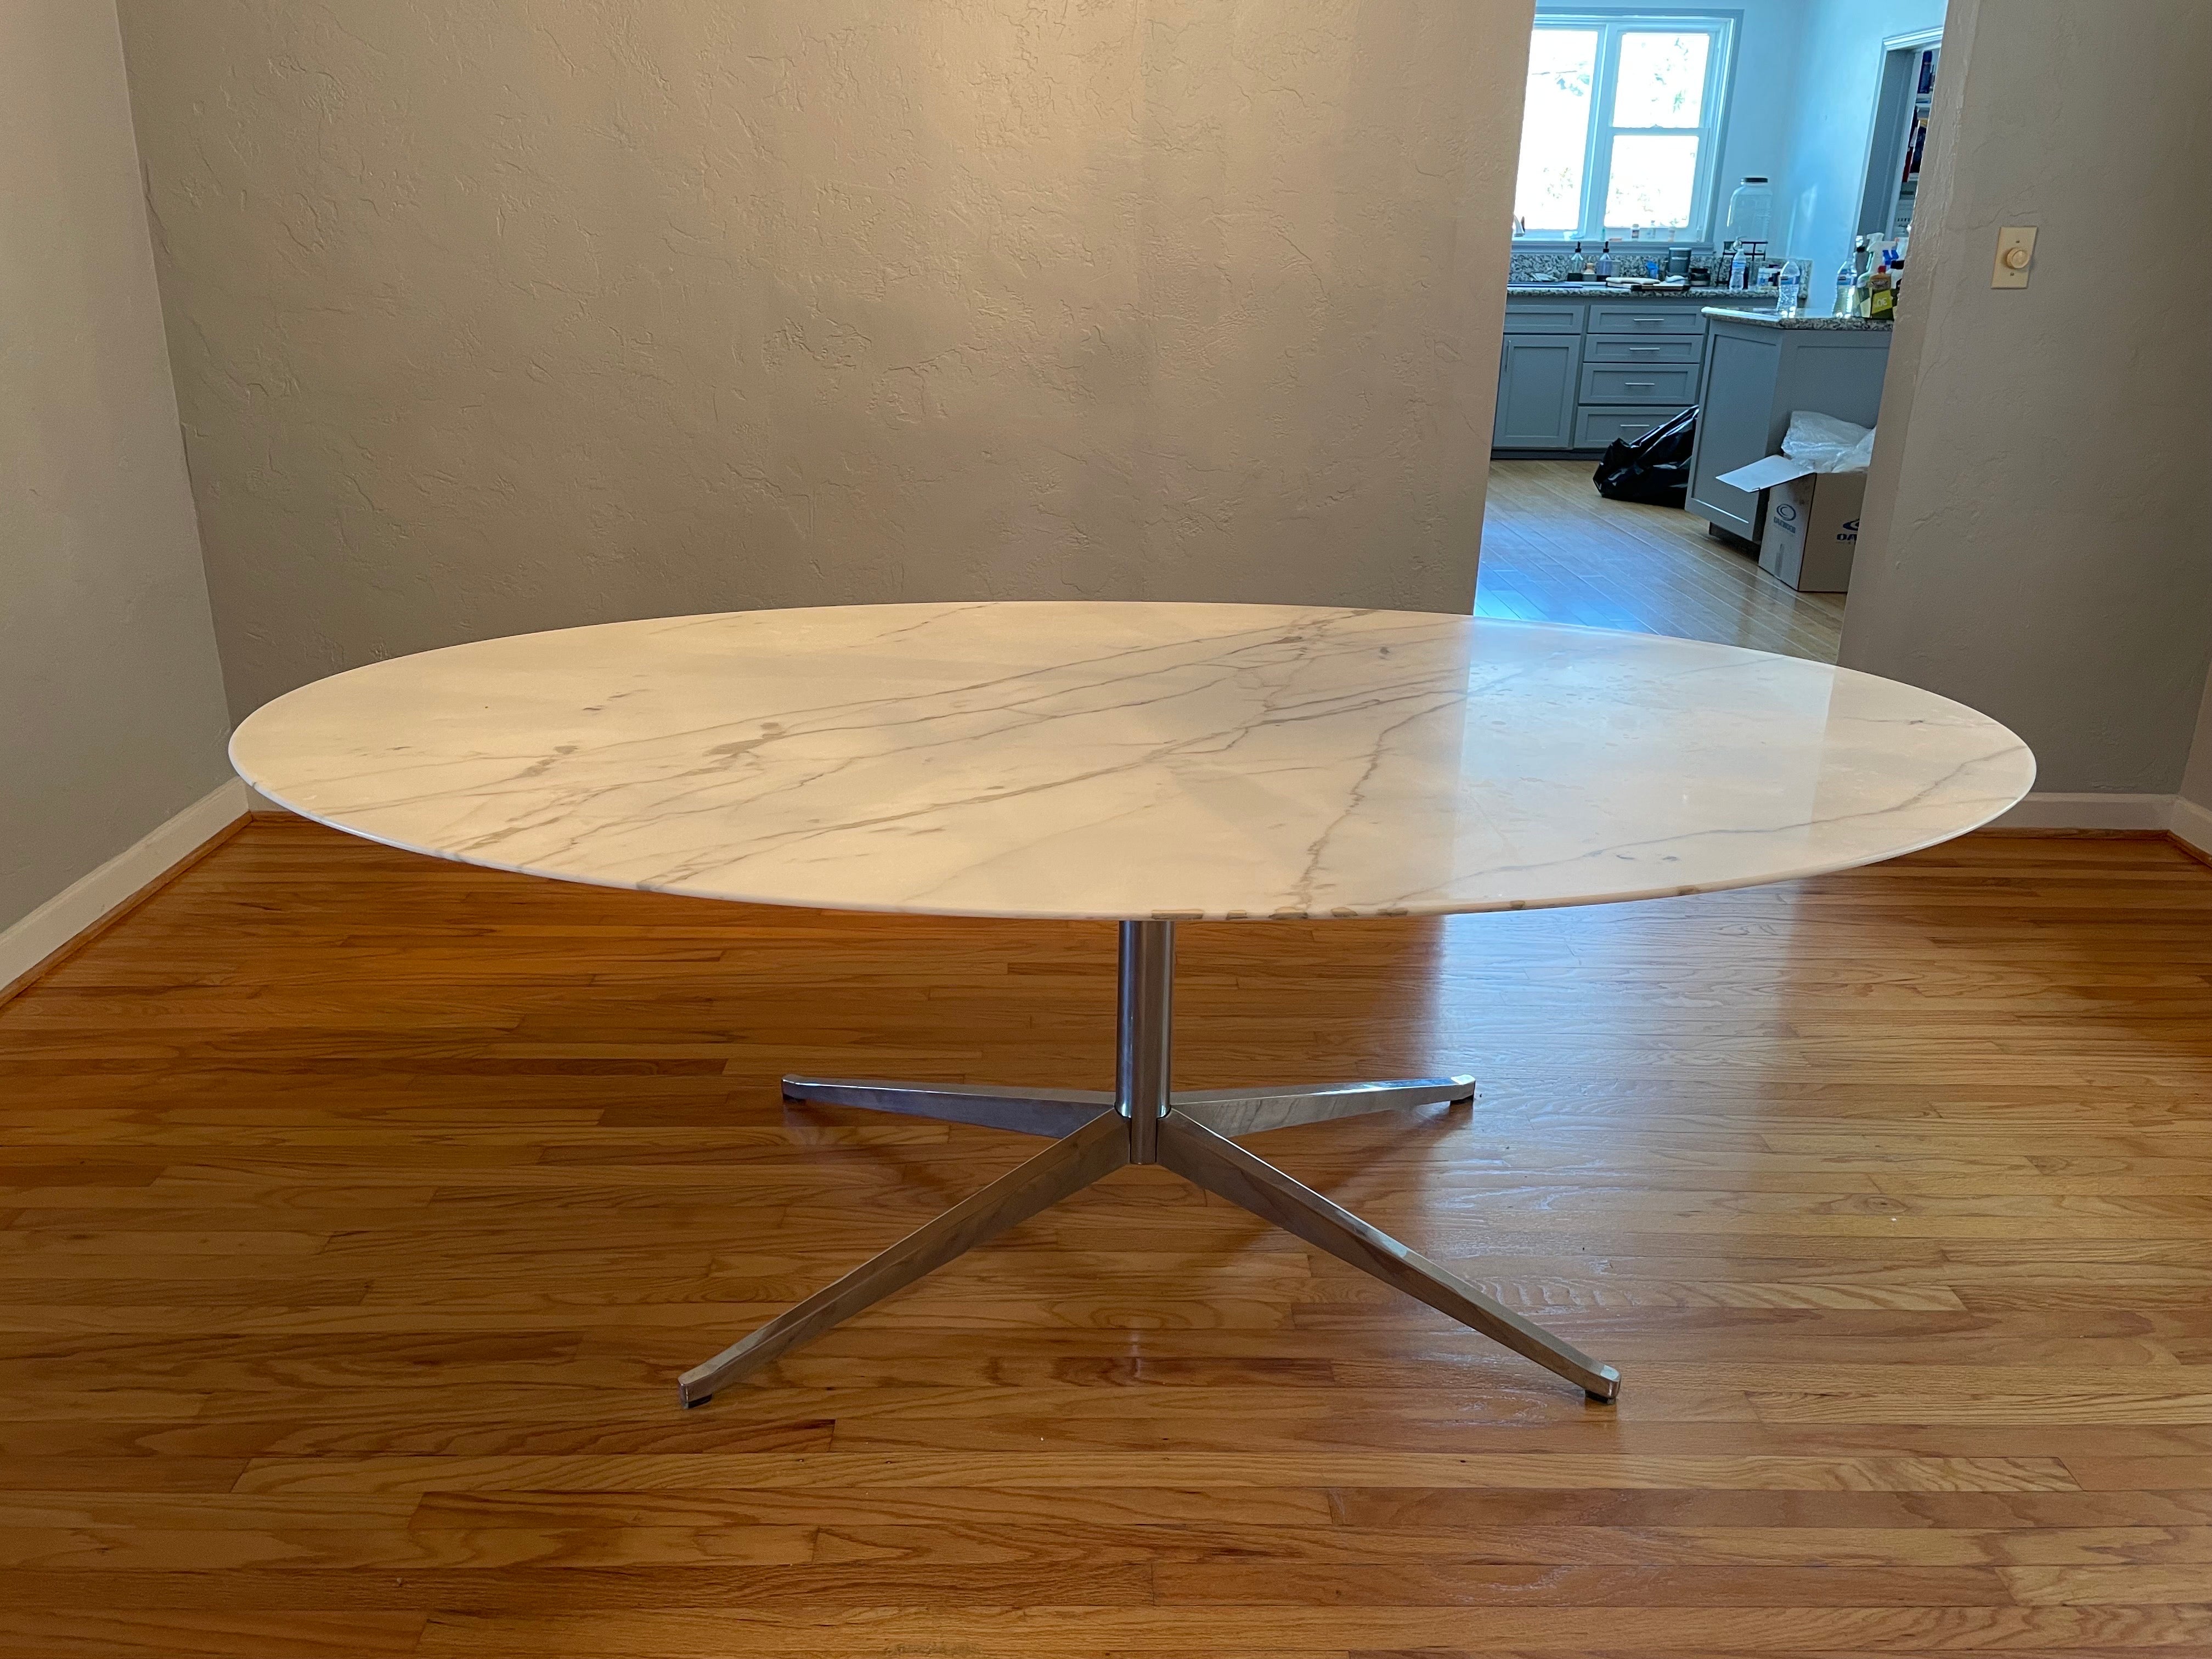 Knoll conference table circa 1970s great design can be used like a dining table or desk table, some wear due to age please check the pictures. with marble edge top and chrome-plated base.